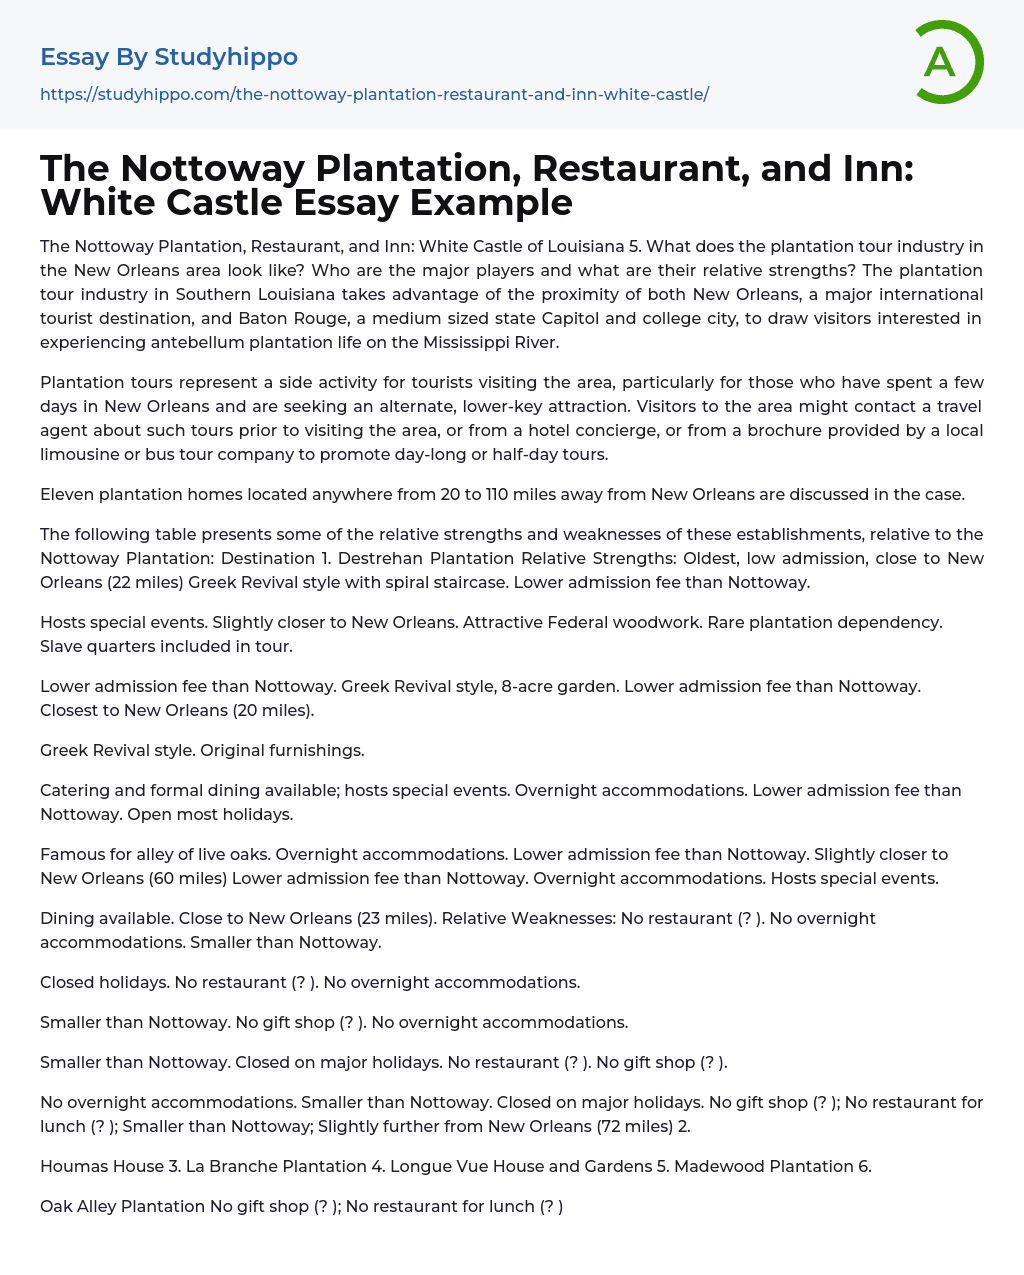 The Nottoway Plantation, Restaurant, and Inn: White Castle Essay Example